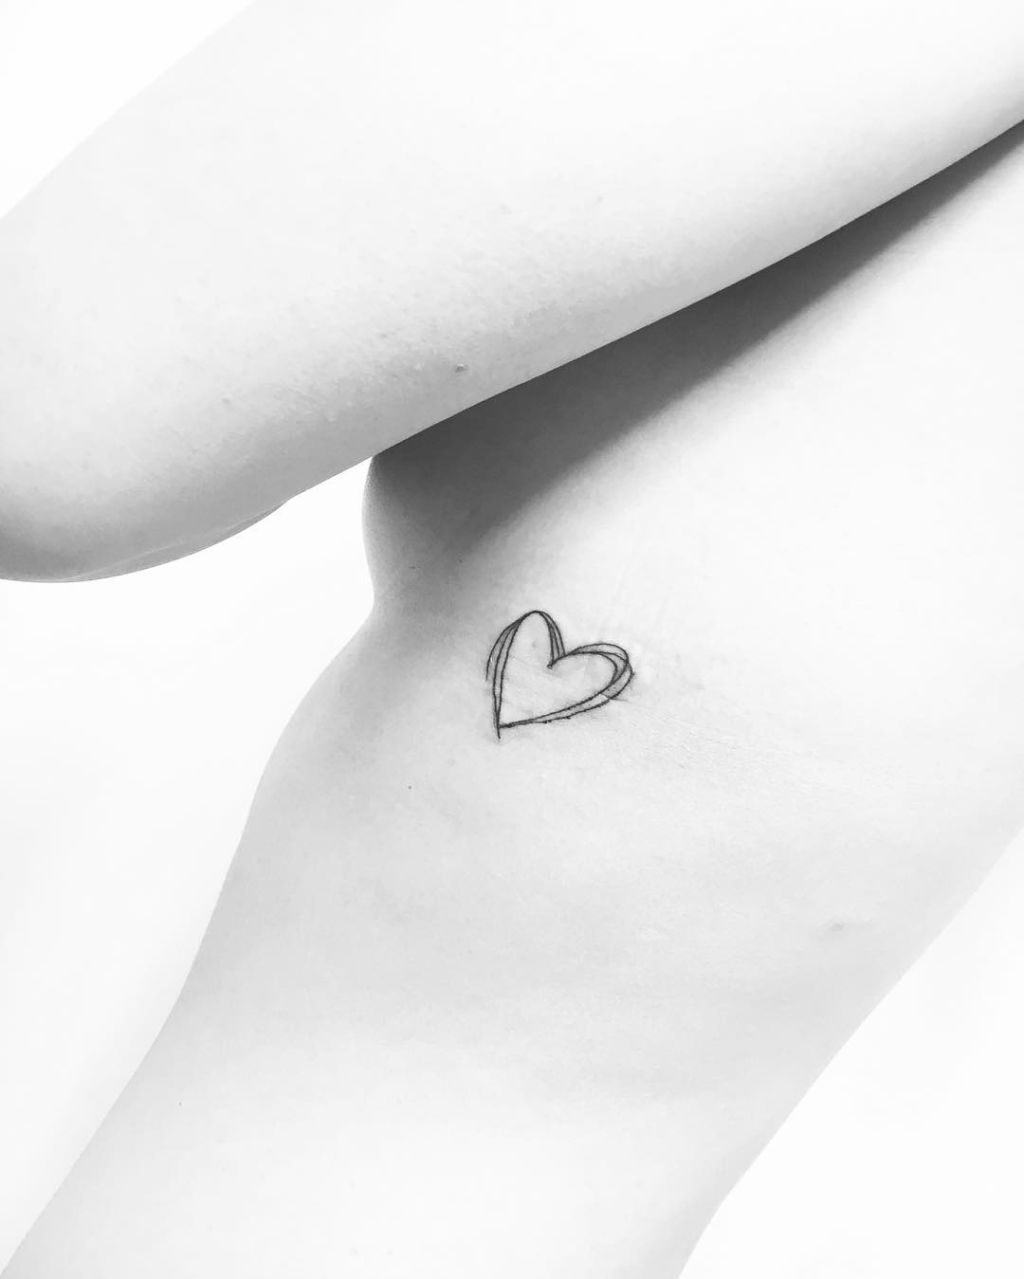 30 Powerful Tattoo Ideas For Women Who Don't Give A Damn